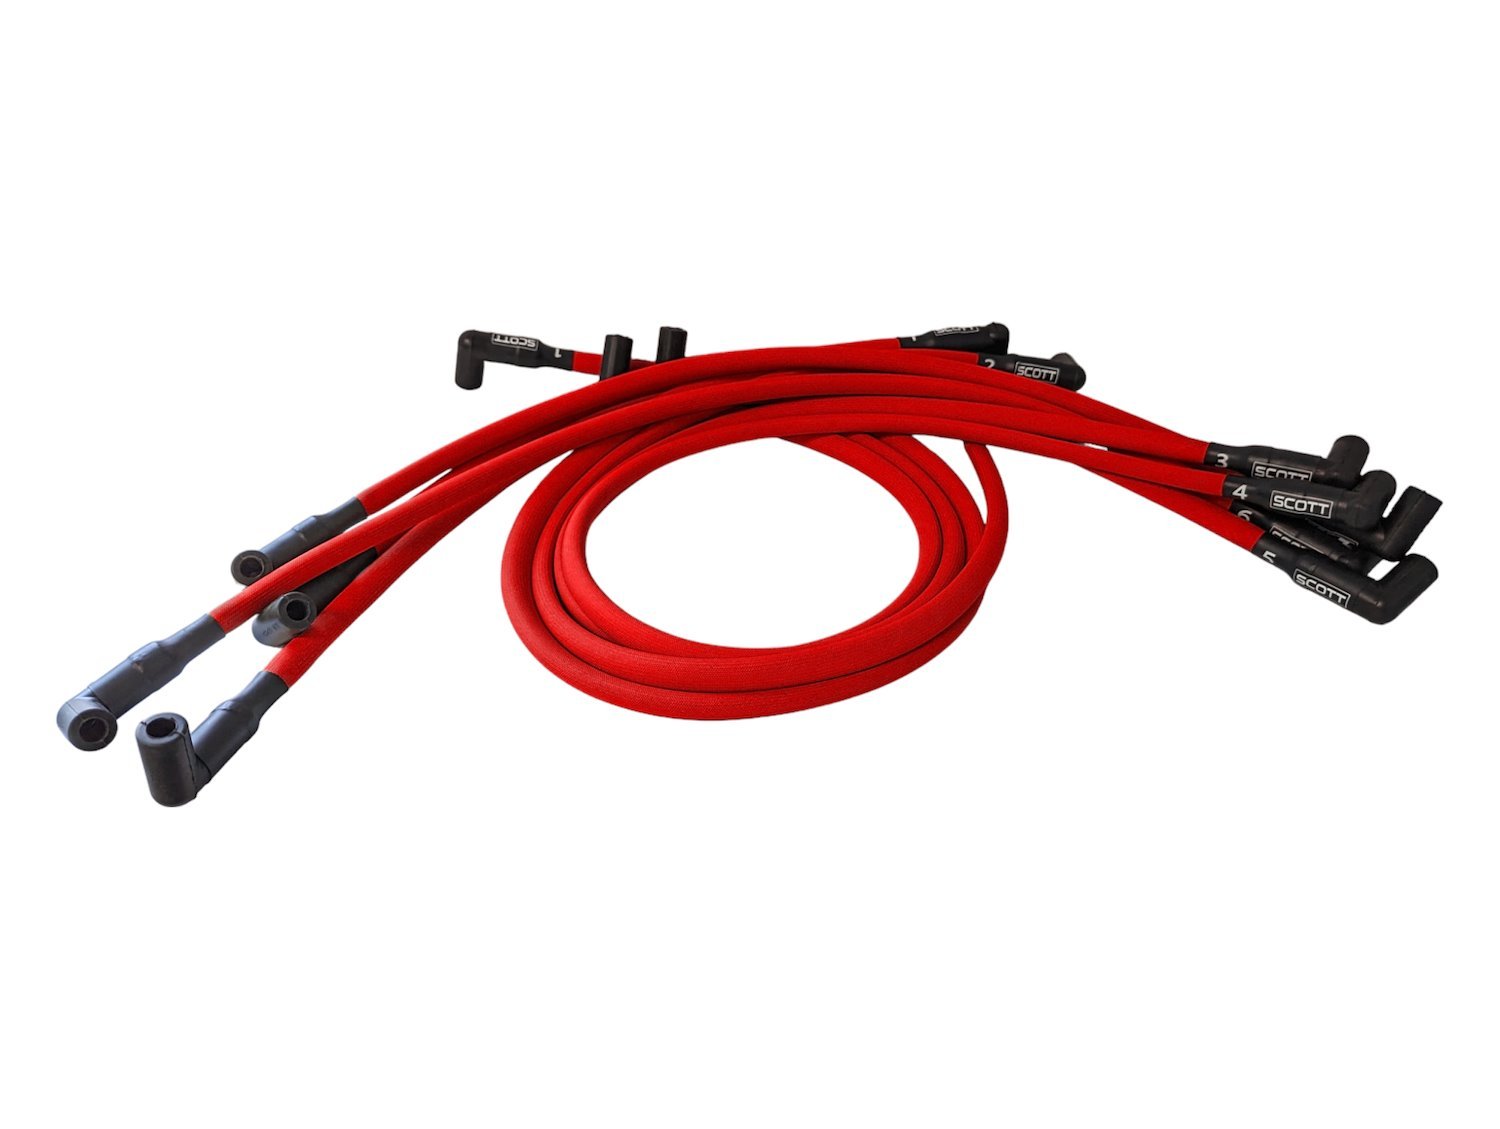 SPW-PS-604-2 High-Performance Fiberglass-Oversleeved Spark Plug Wire Set for Small Block Chevy 604 Crate, Under Header [Red]